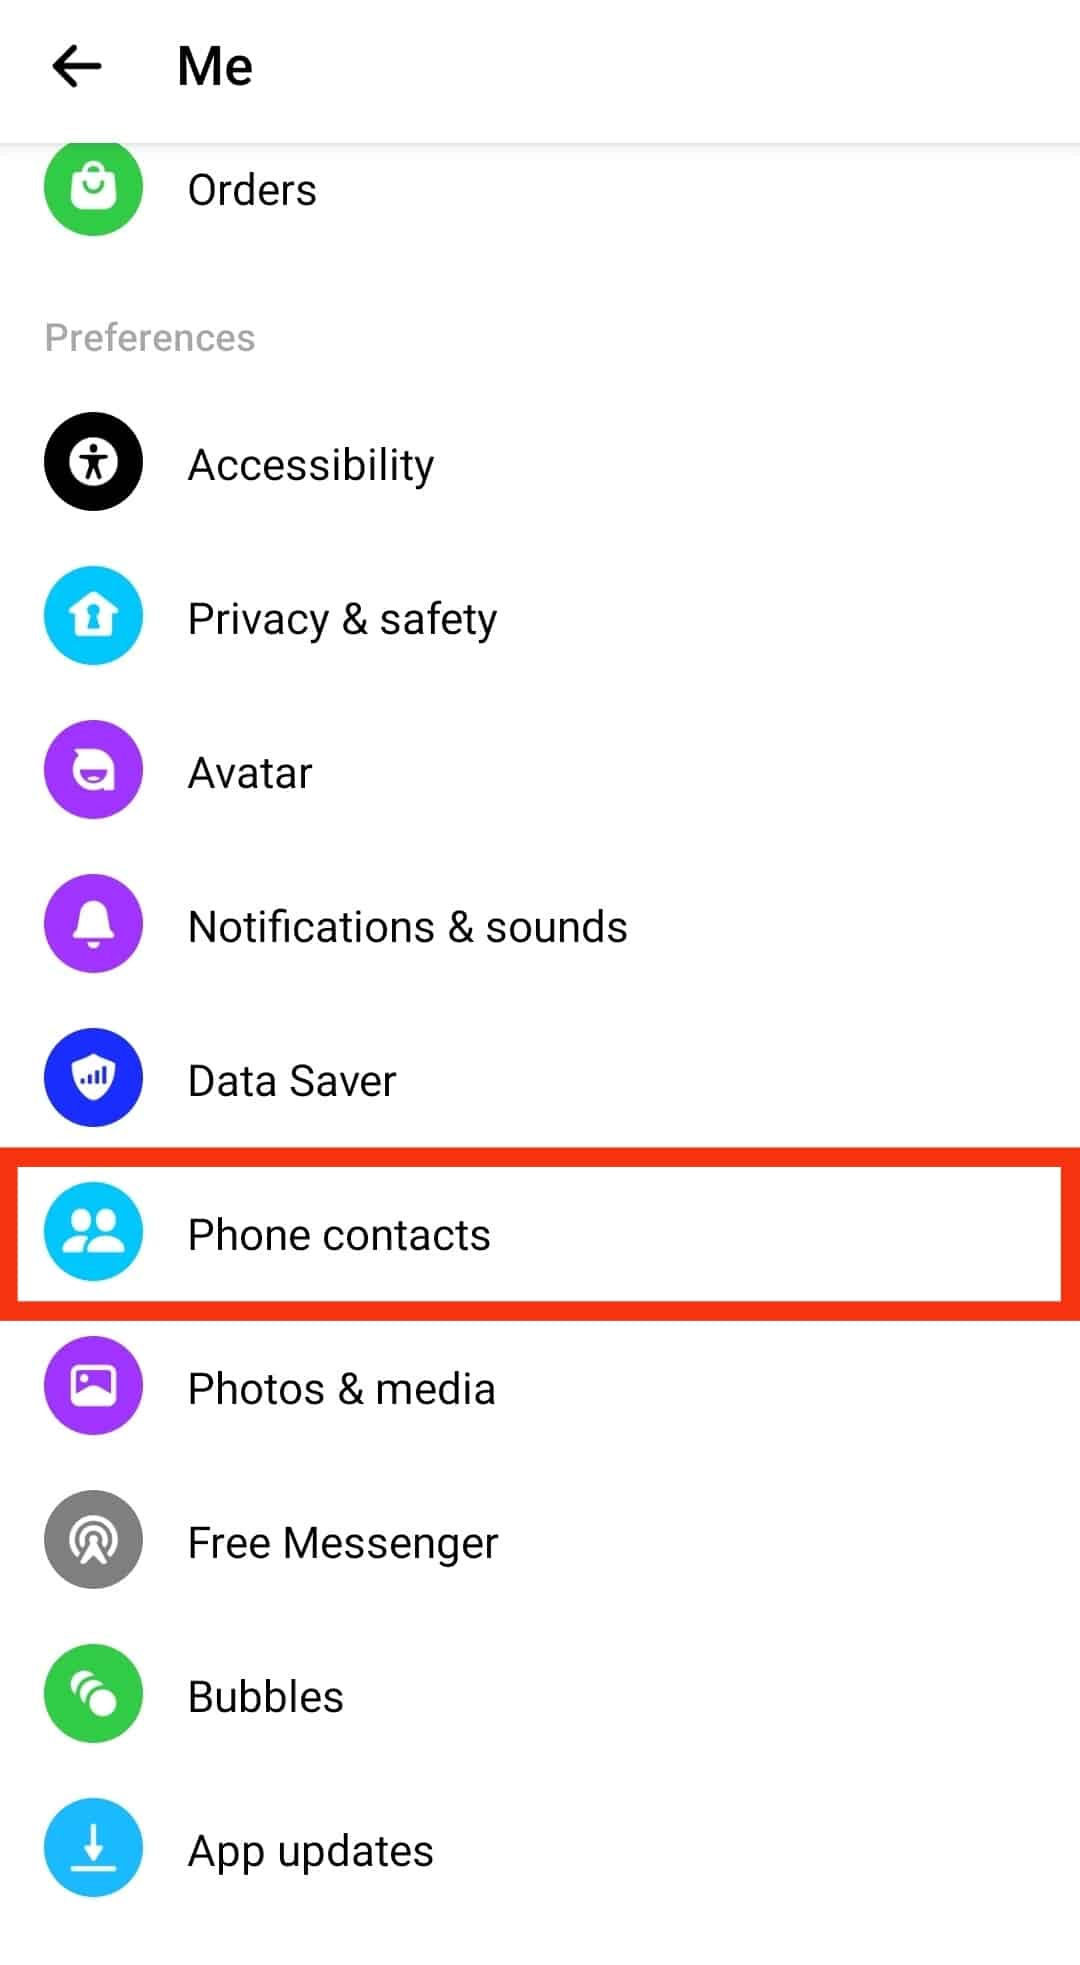 Tap The Phone Contacts Option